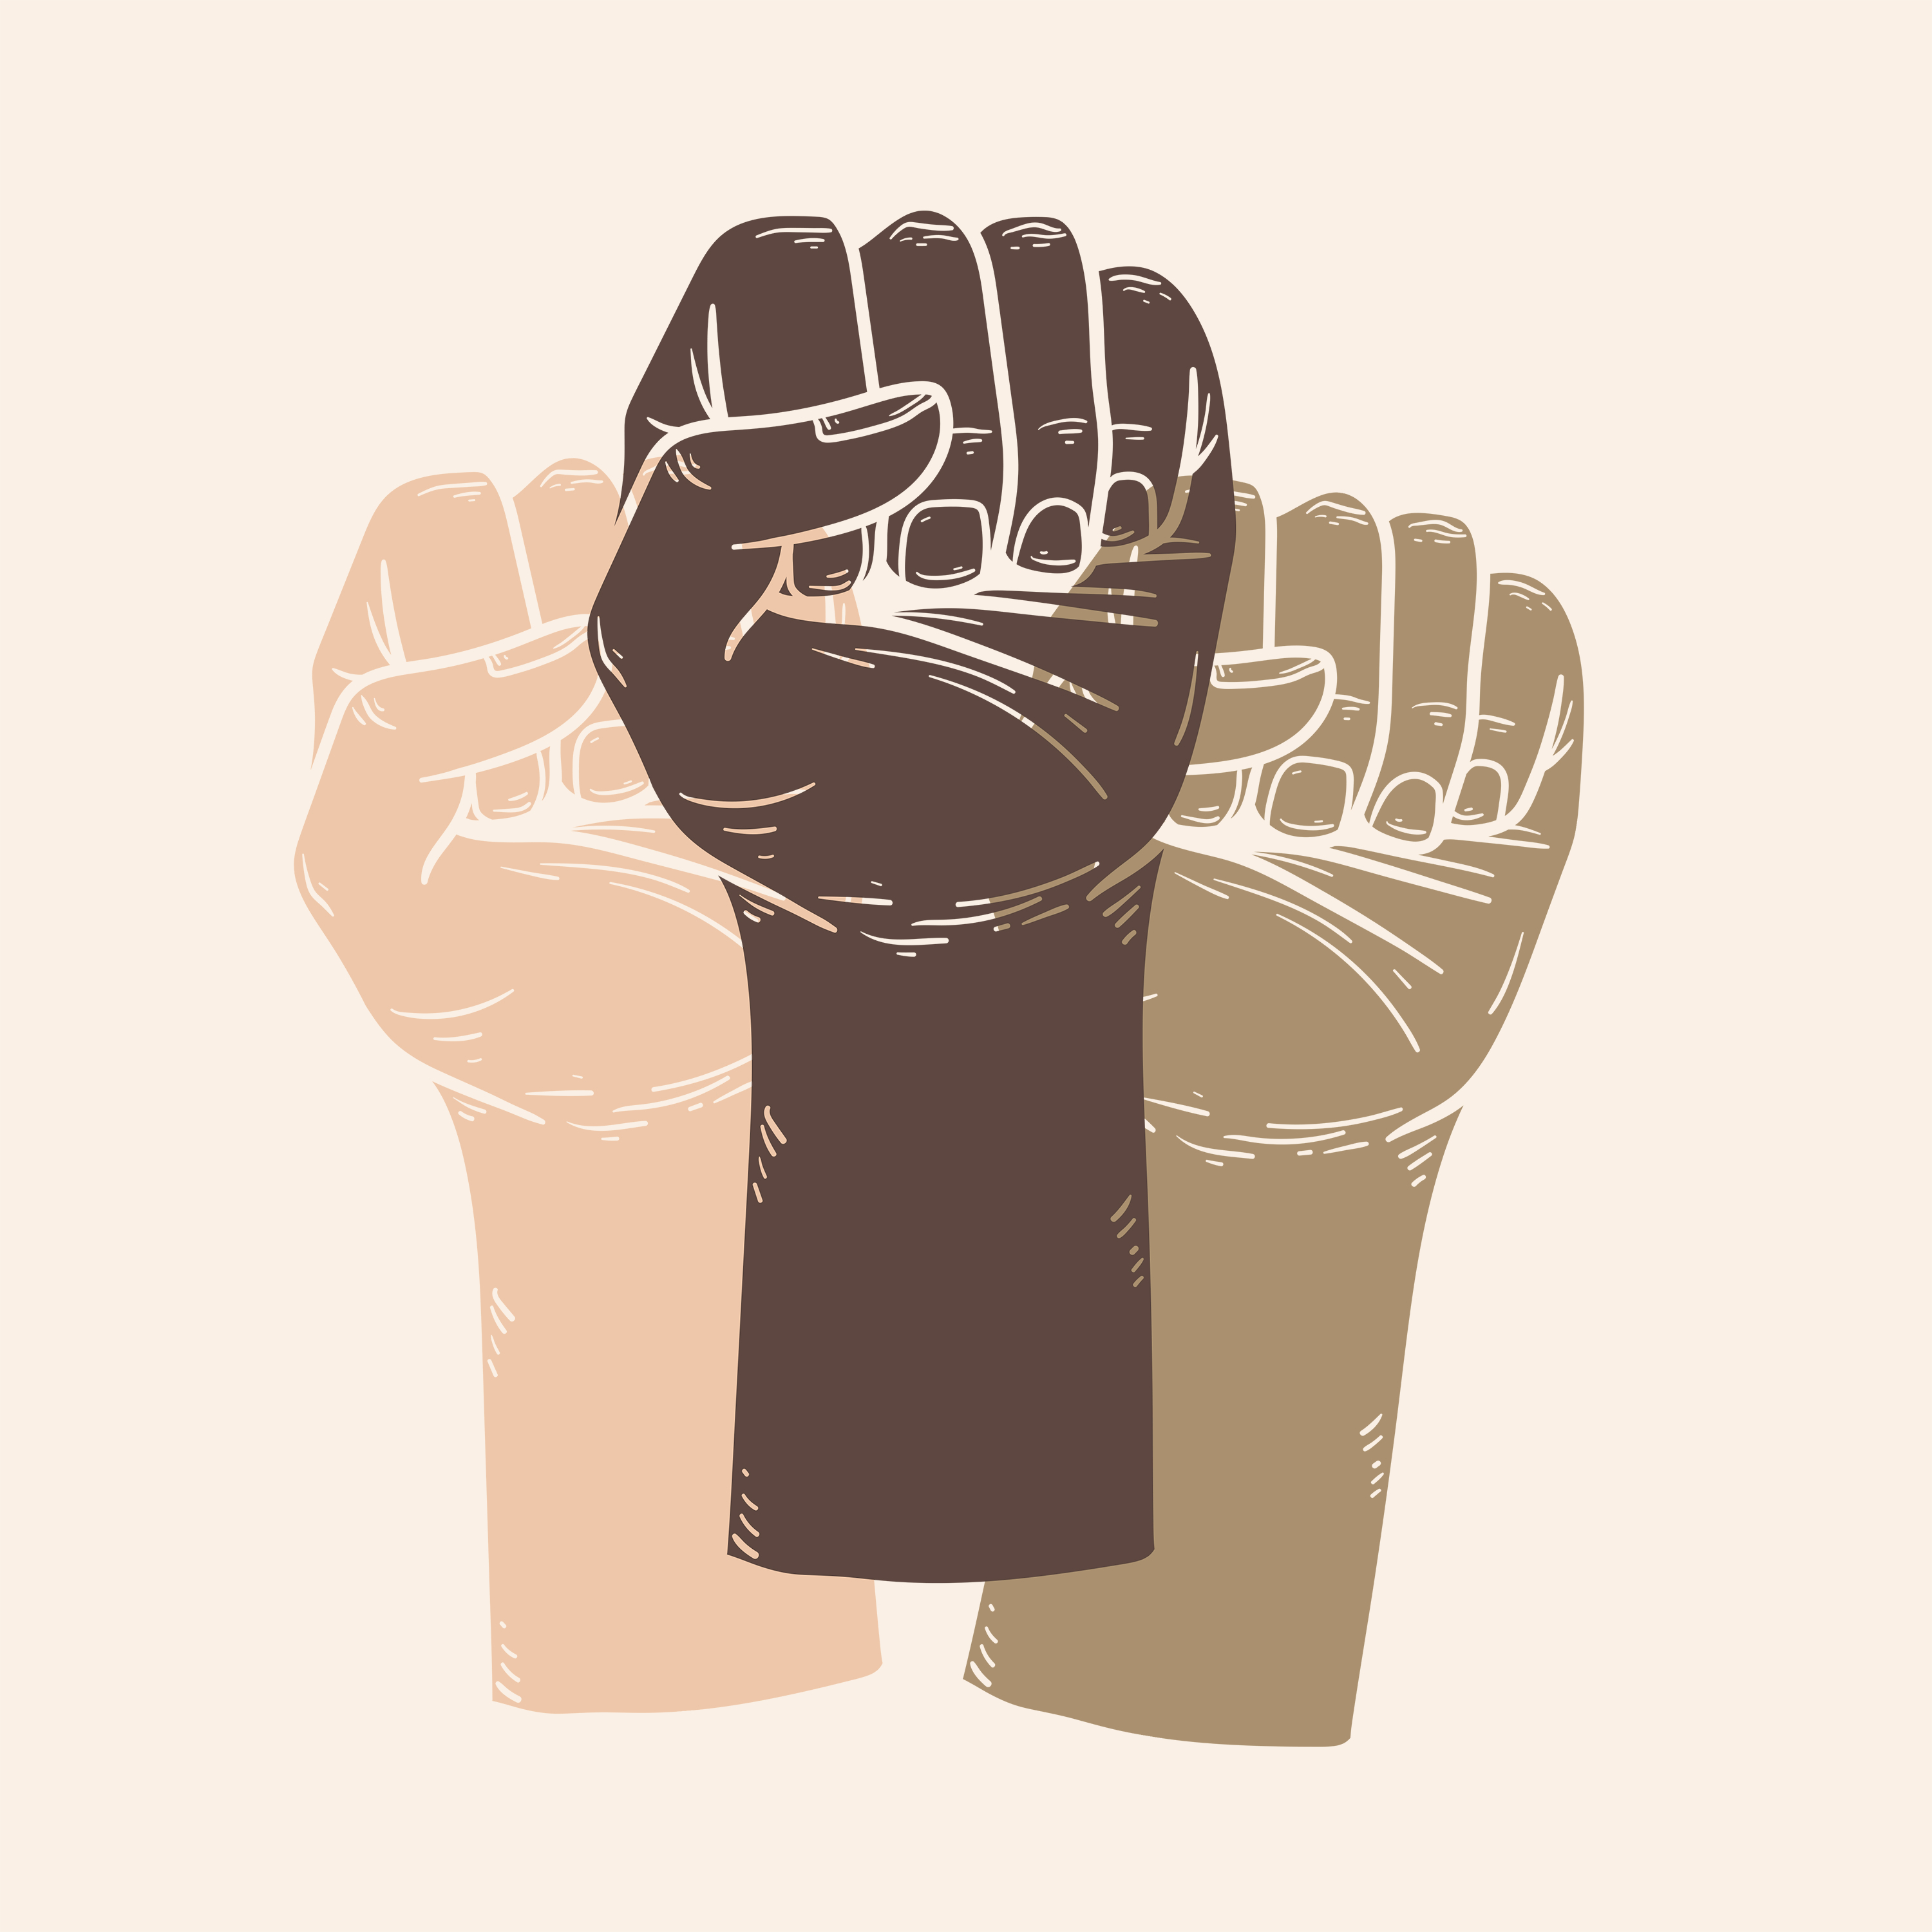 <a href="https://www.freepik.com/free-photo/colorful-fists-illustration-equality-campaign-blm-movement-social-media-post_15550645.htm#query=stop%20racism&position=11&from_view=keyword&track=robertav1_2_sidr">Image by rawpixel.com</a> on Freepik